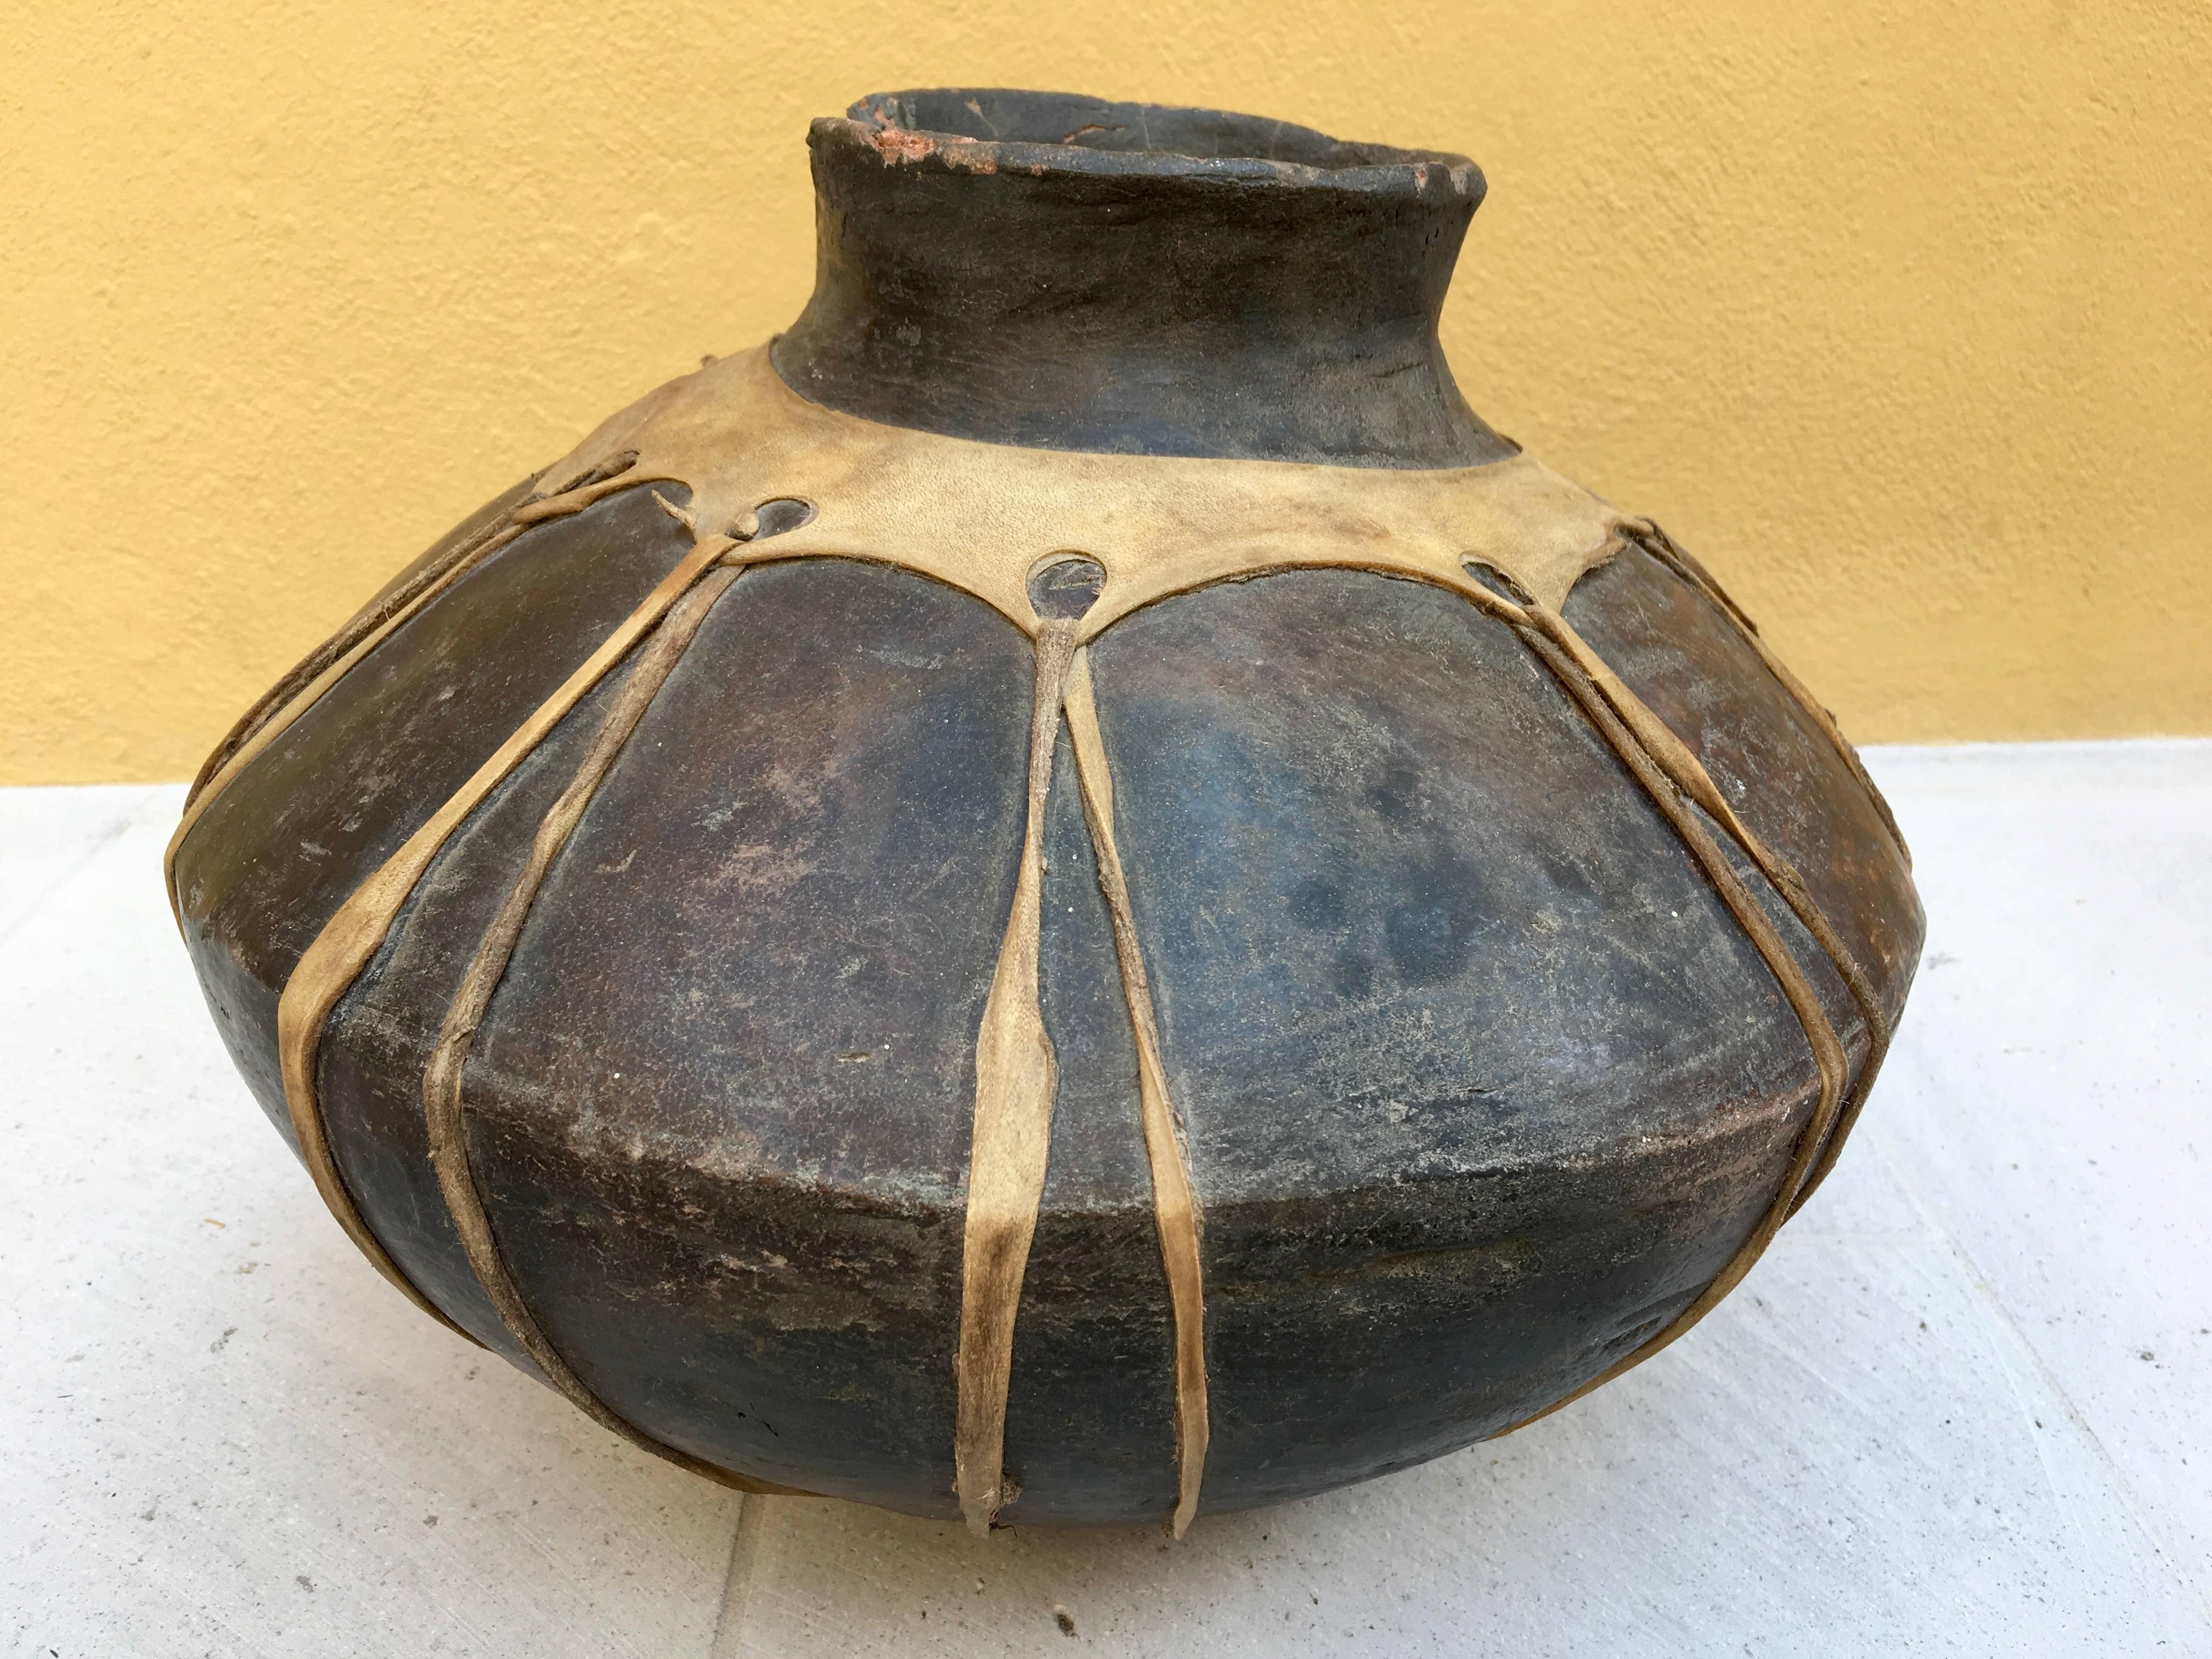 Late 19th century, ceramic water vessel from the Raramuri or Tarahumara people of Chihuahua, Mexico. The pot is traditionally wrapped with pig trip for protection. The vessel represents Fine craftsmanship and skill in pottery that the Tarahumara